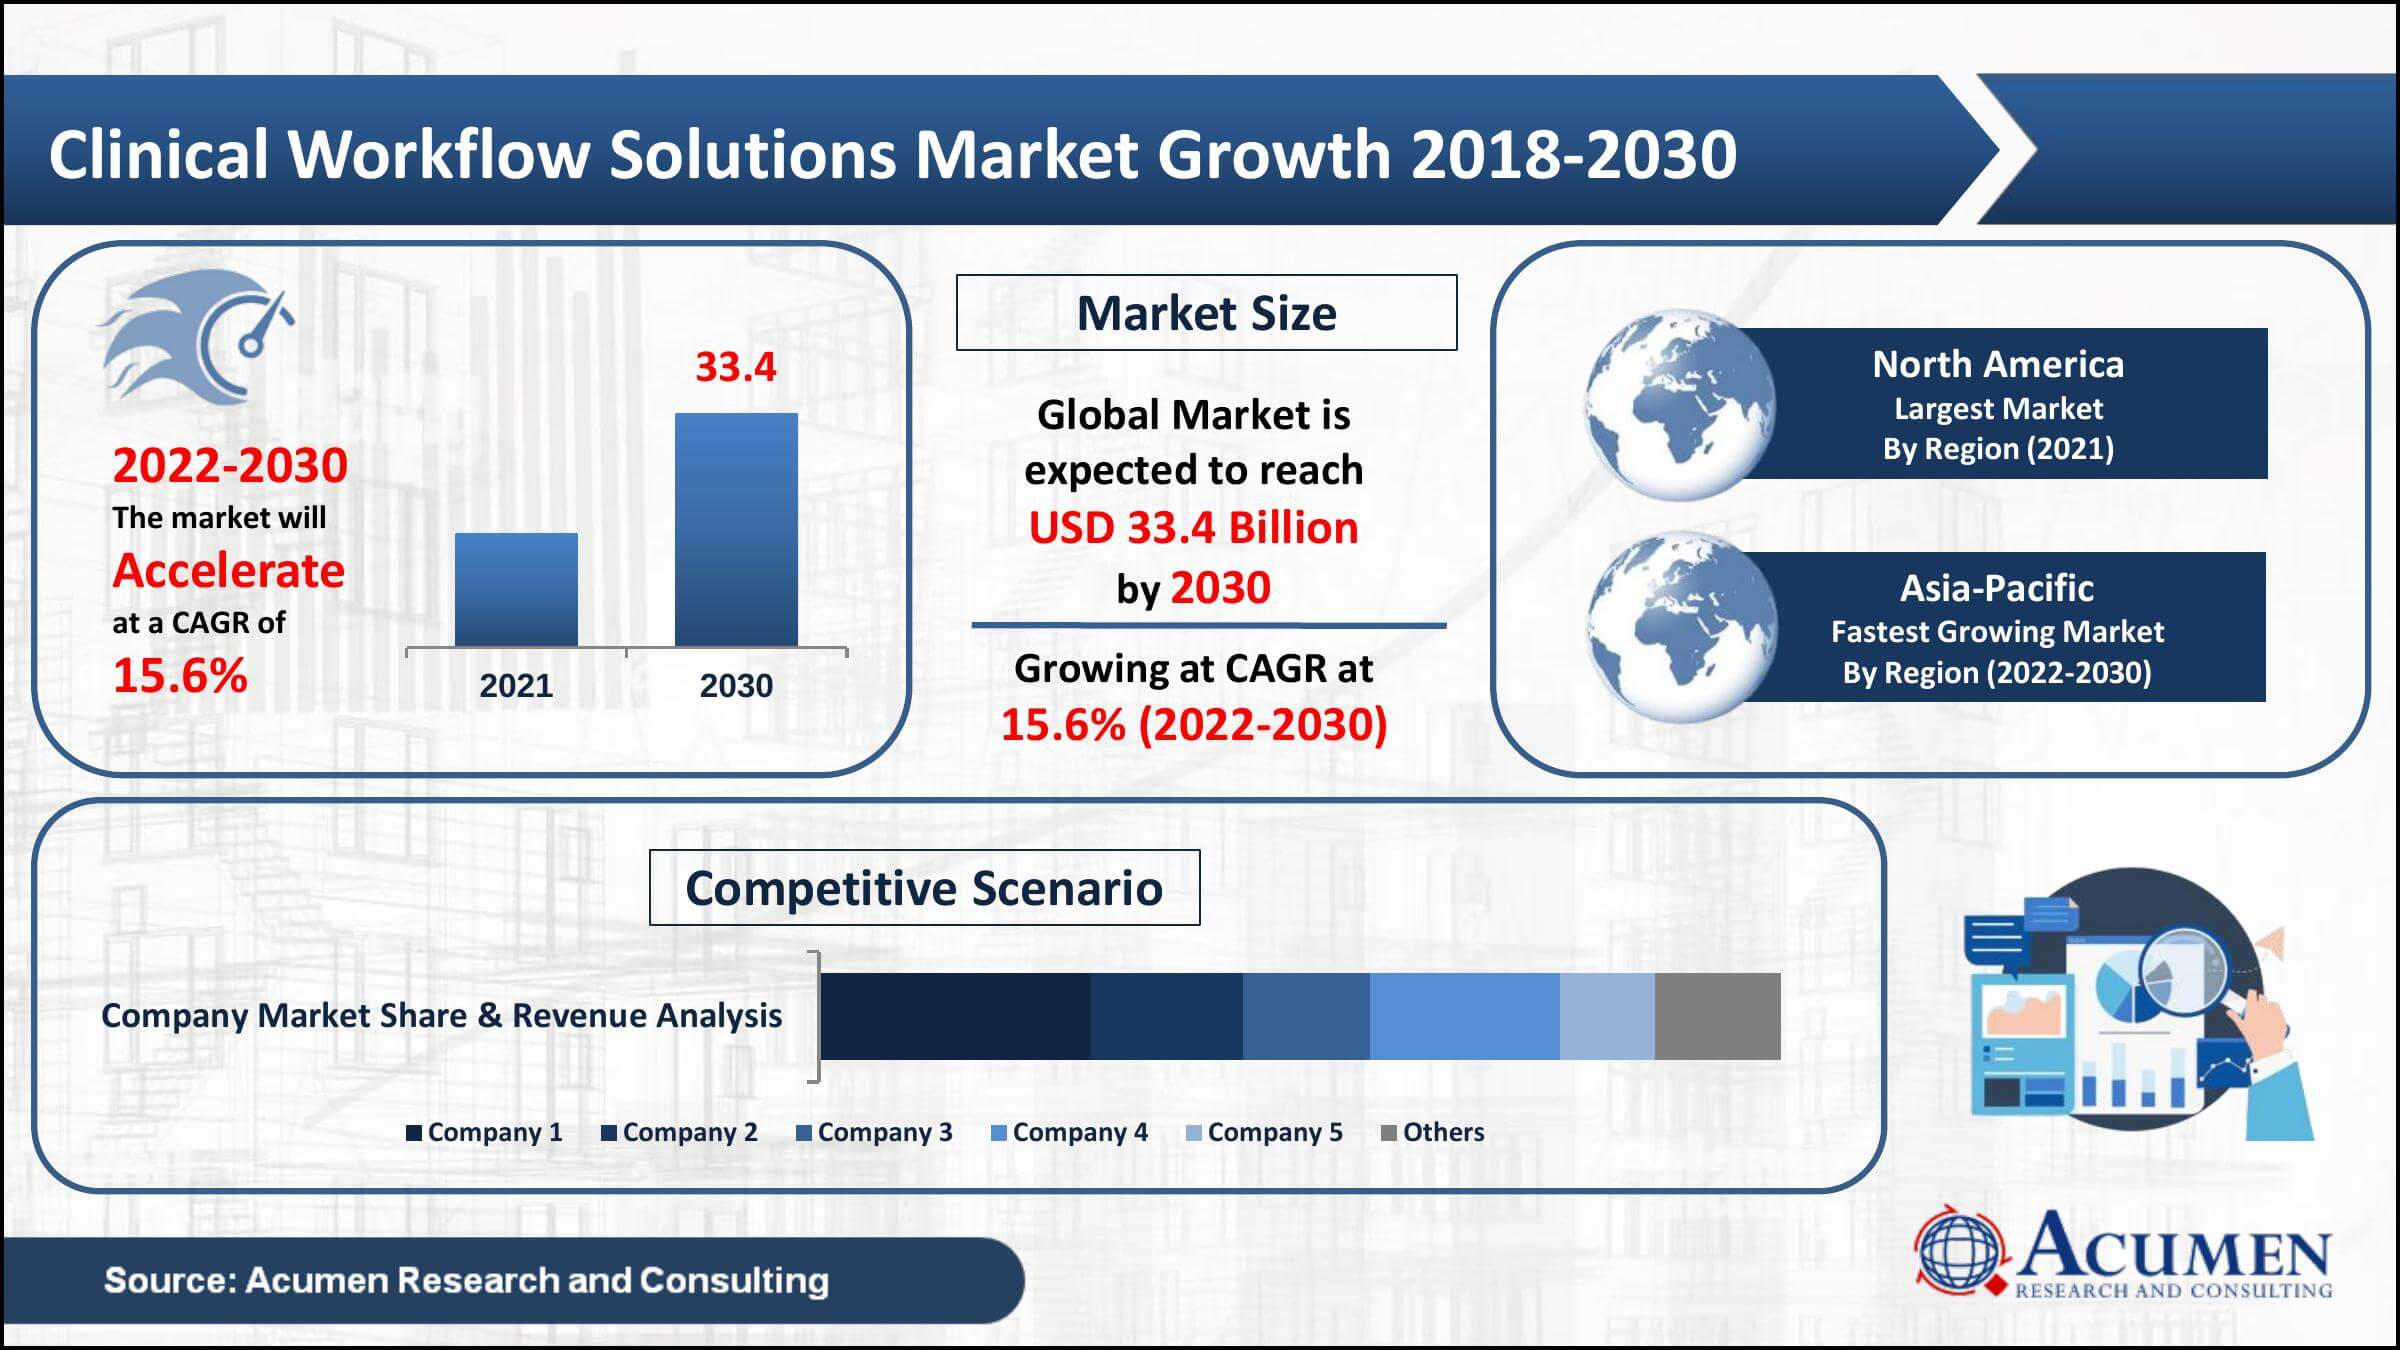 Global clinical workflow solutions market revenue collected USD 9.2 Billion in 2021, with a 15.6% CAGR between 2022 and 2030